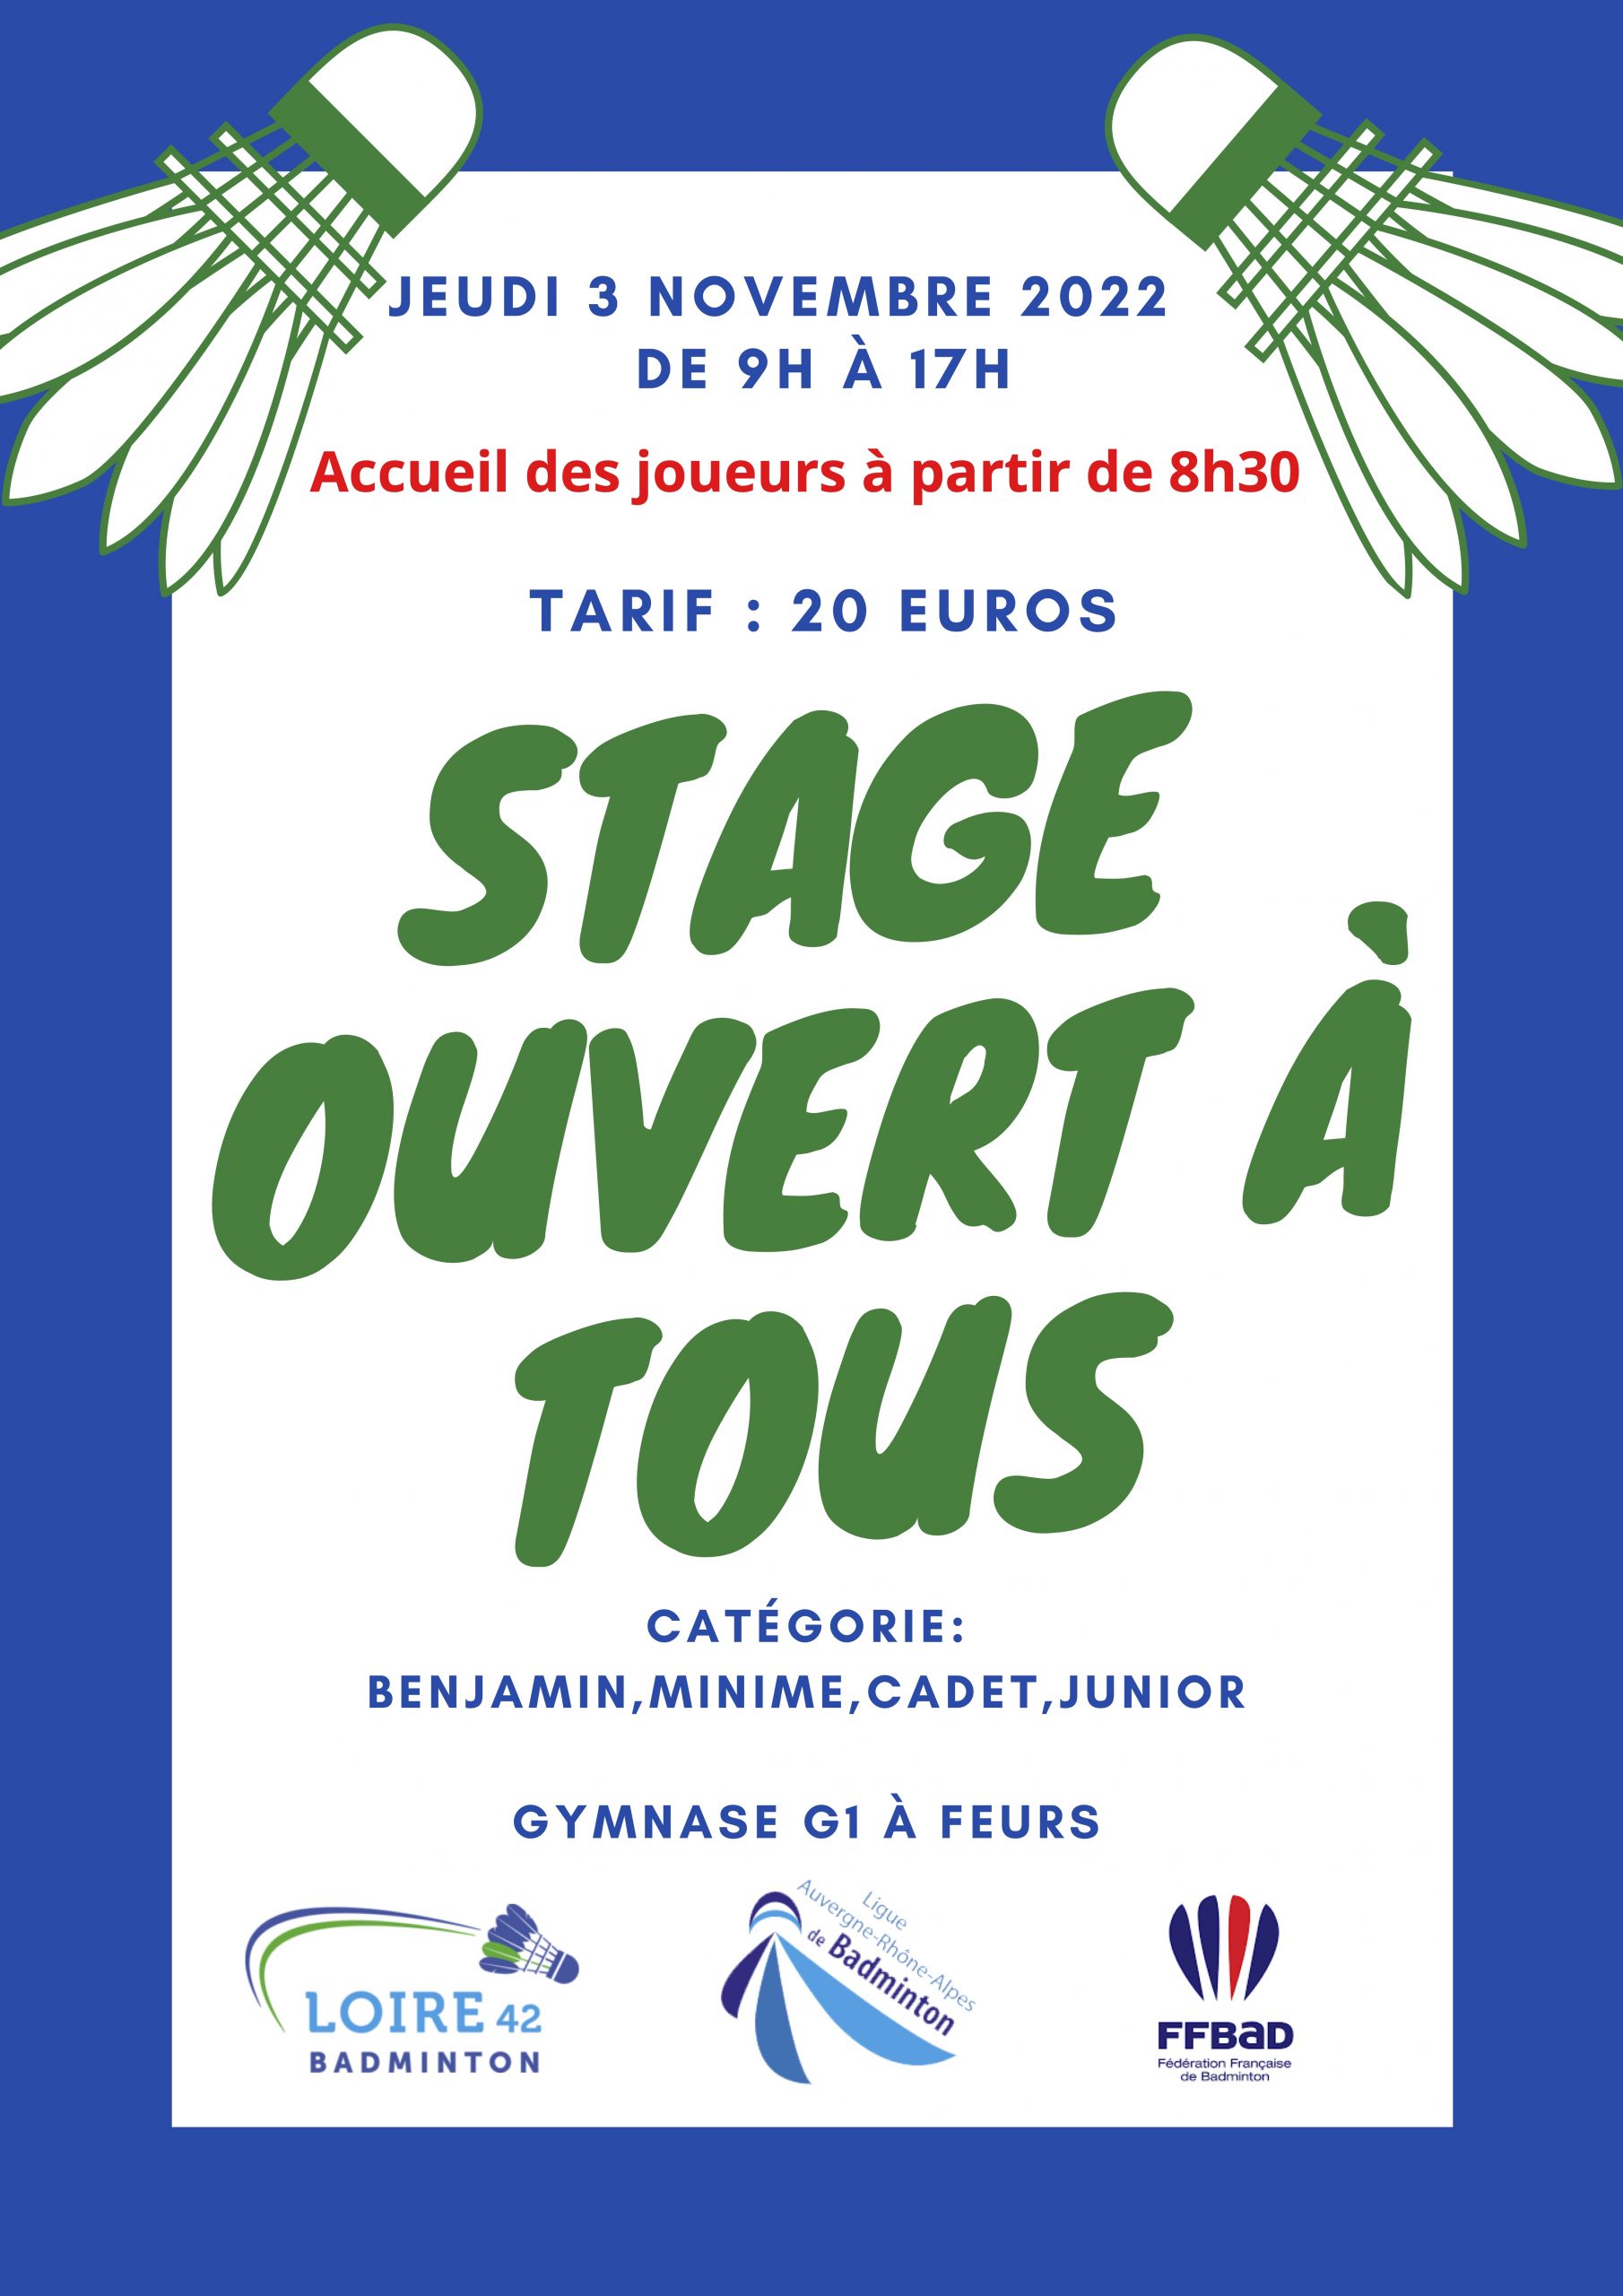 STAGE OUVERT A TOUS